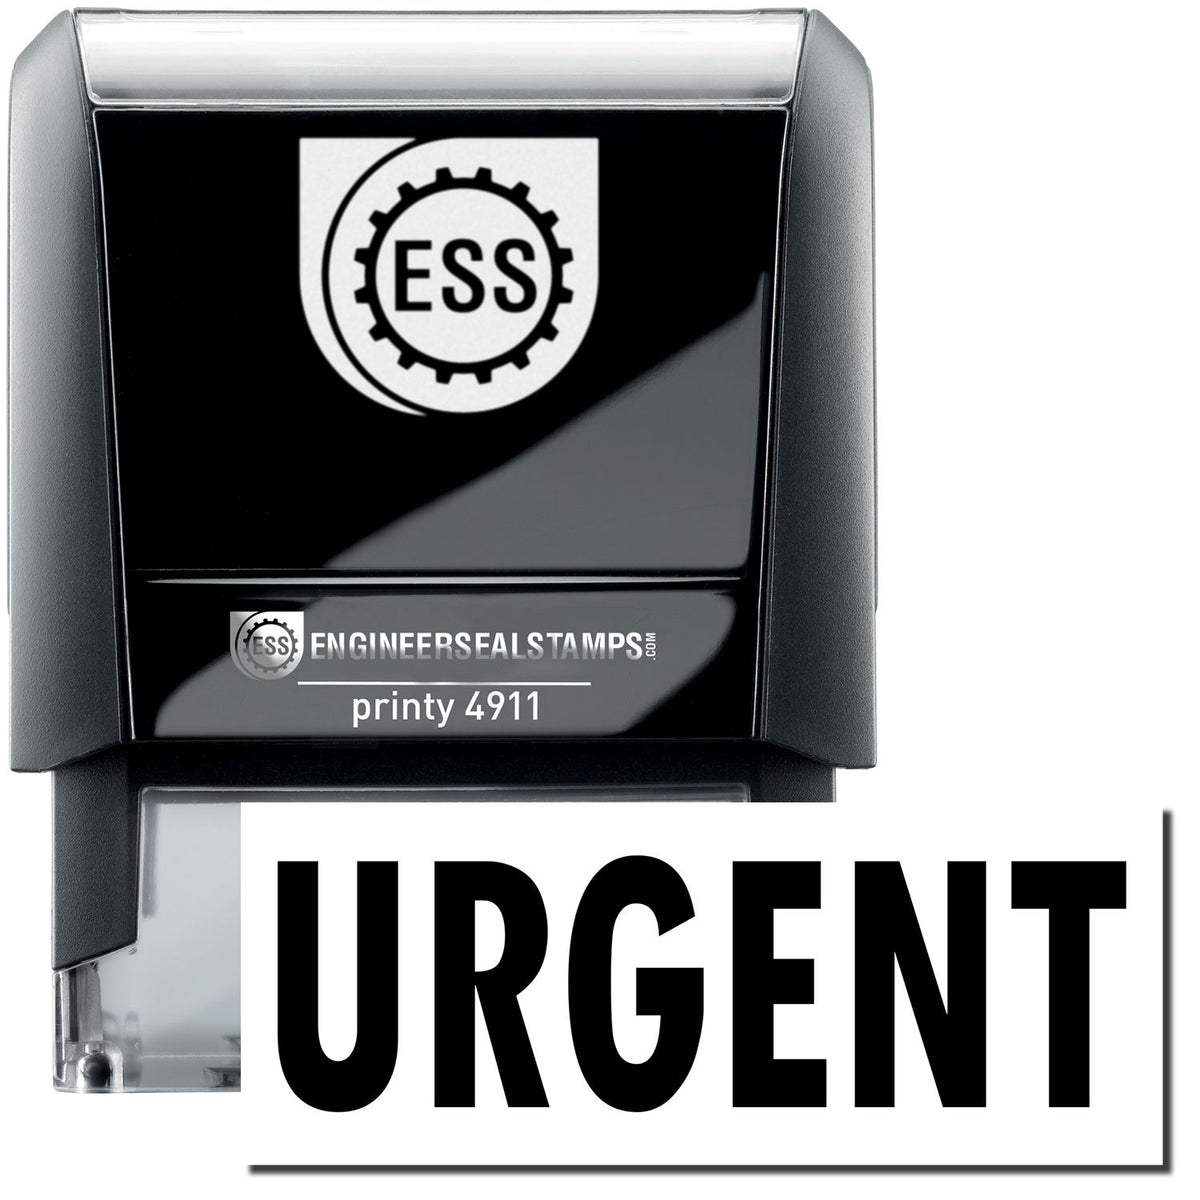 A self-inking stamp with a stamped image showing how the text &quot;URGENT&quot; is displayed after stamping.